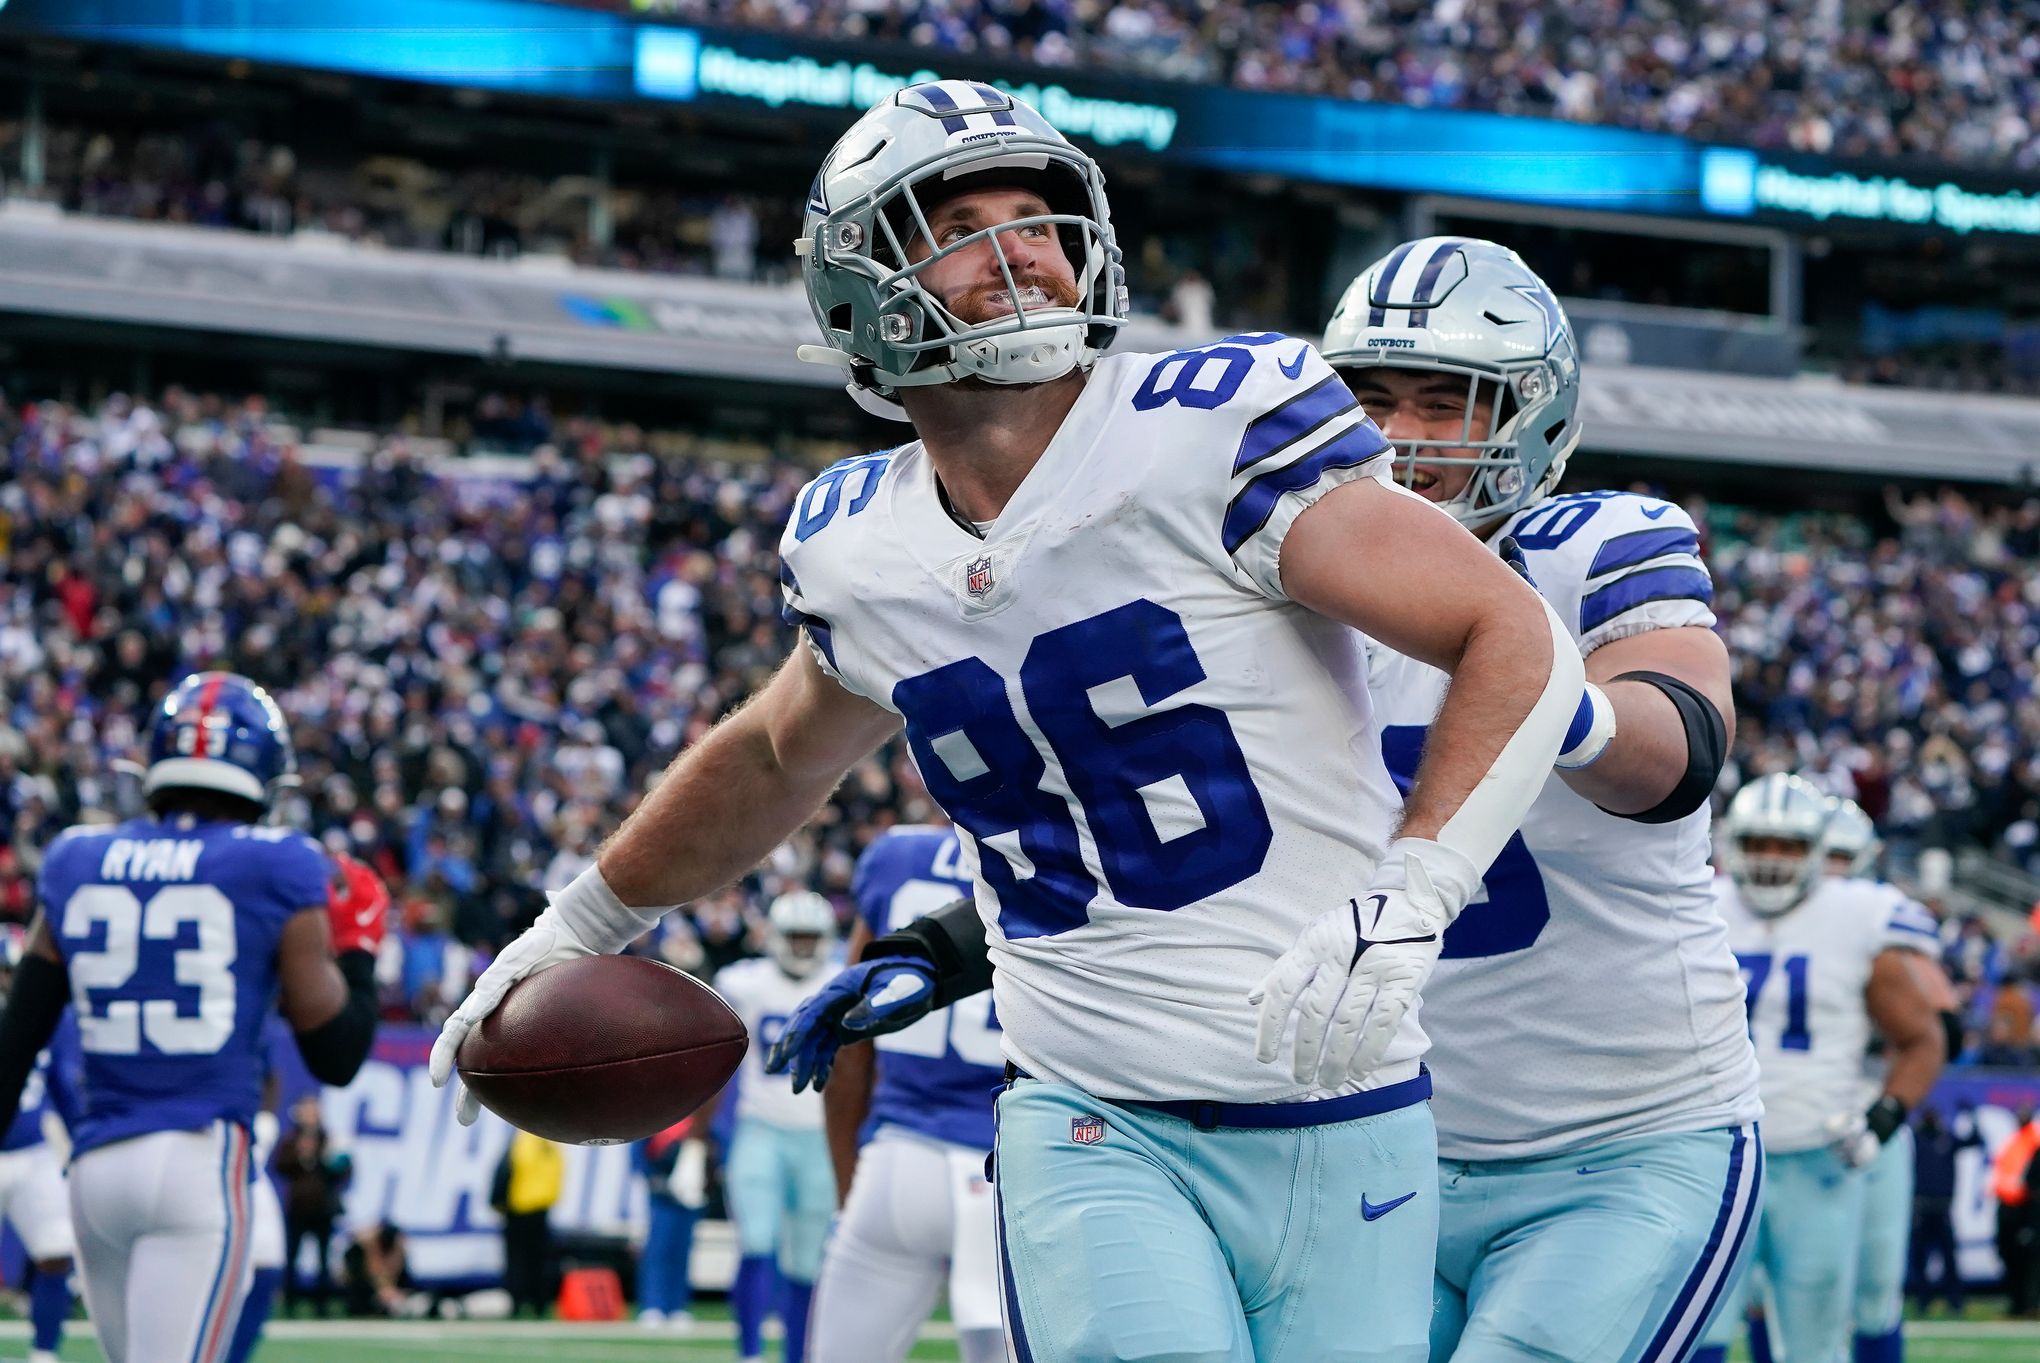 Cowboys' Dalton Schultz has PCL issue in right knee, not expected